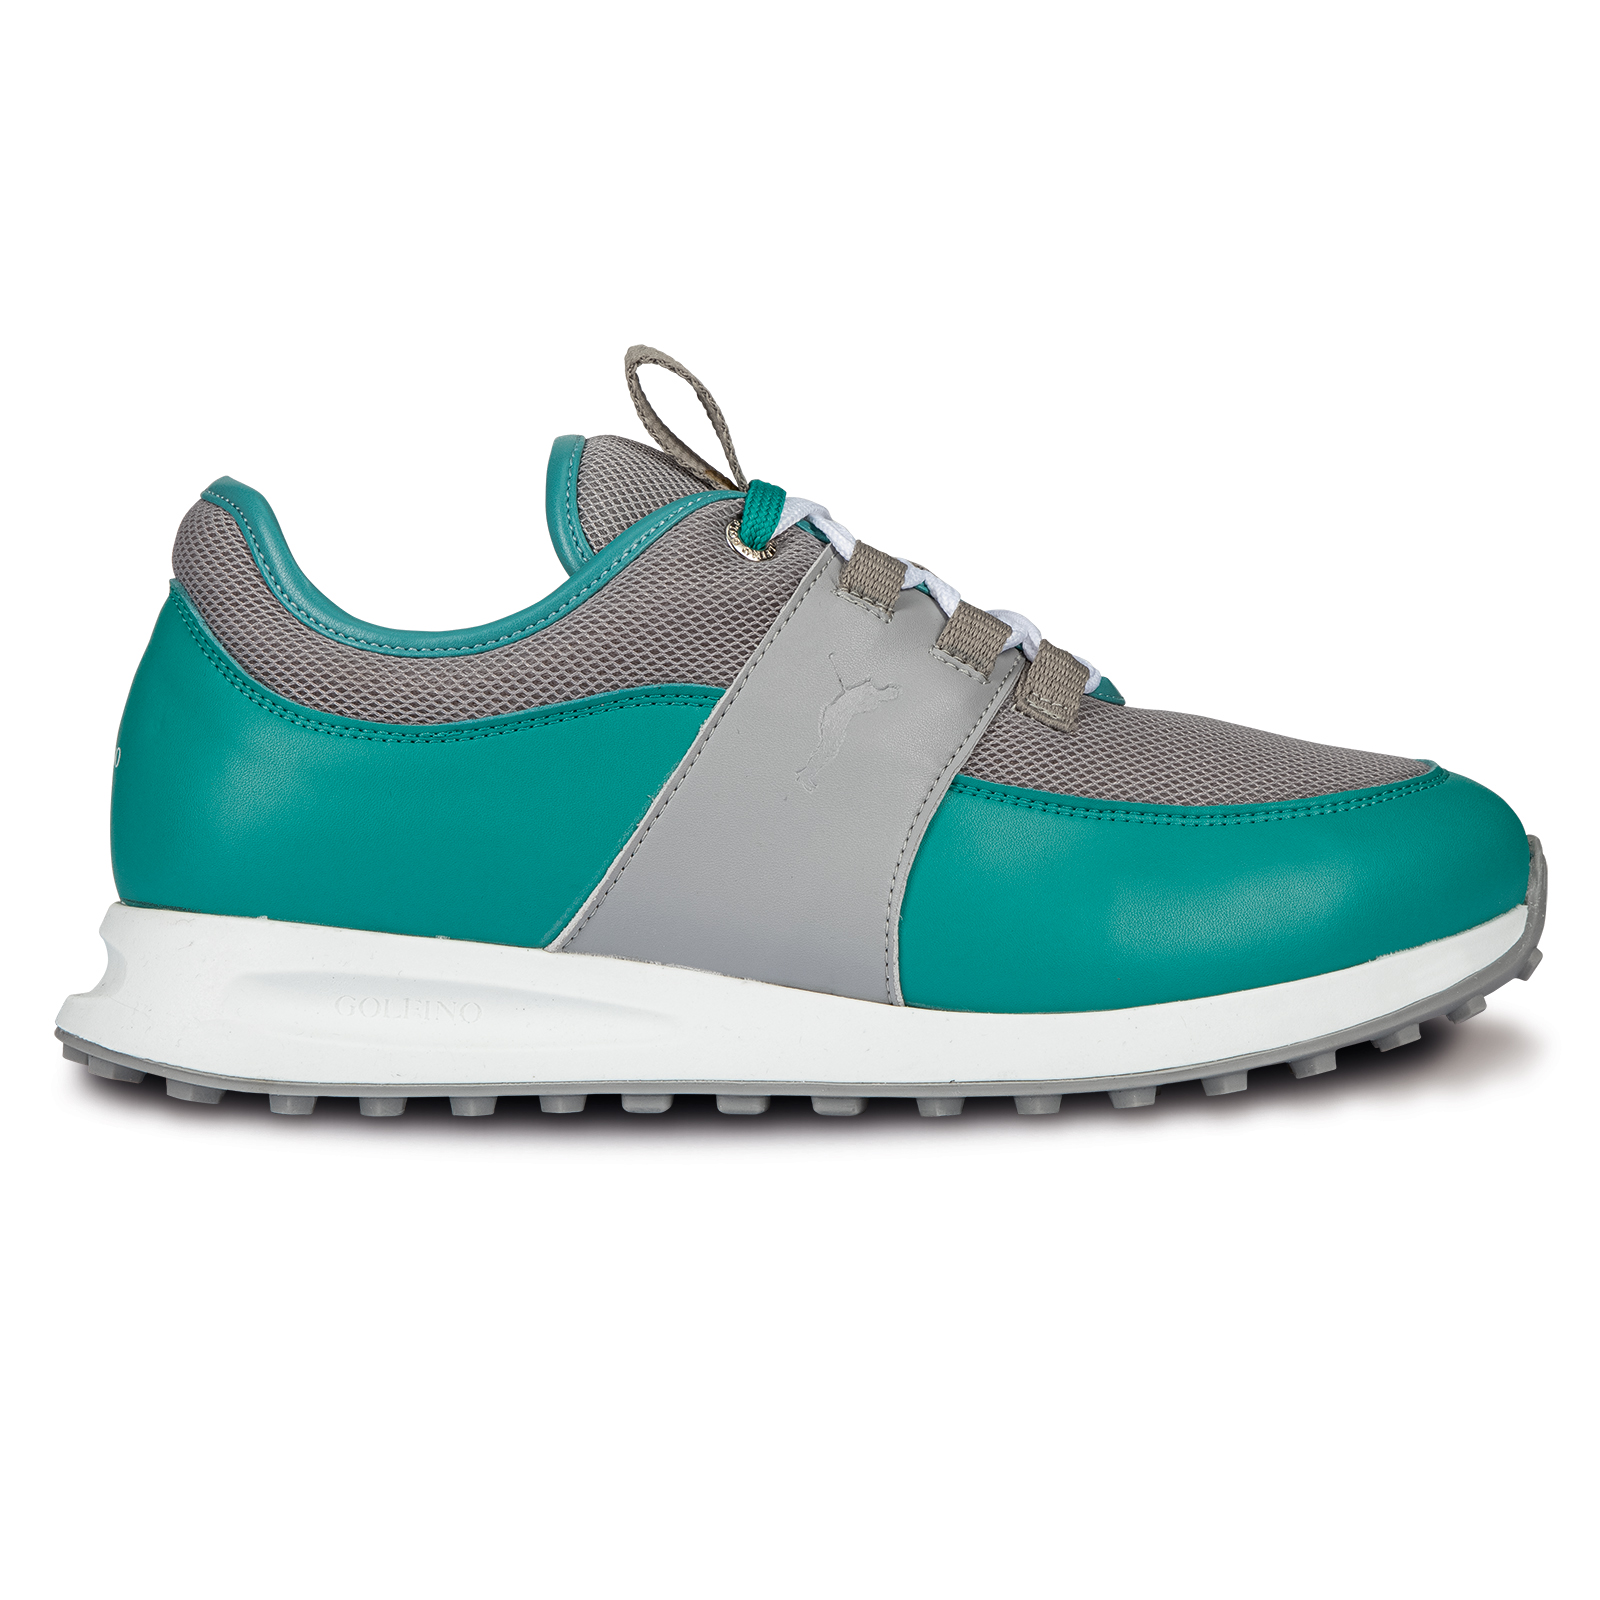 Attractive ladies golf shoes with mesh insert 